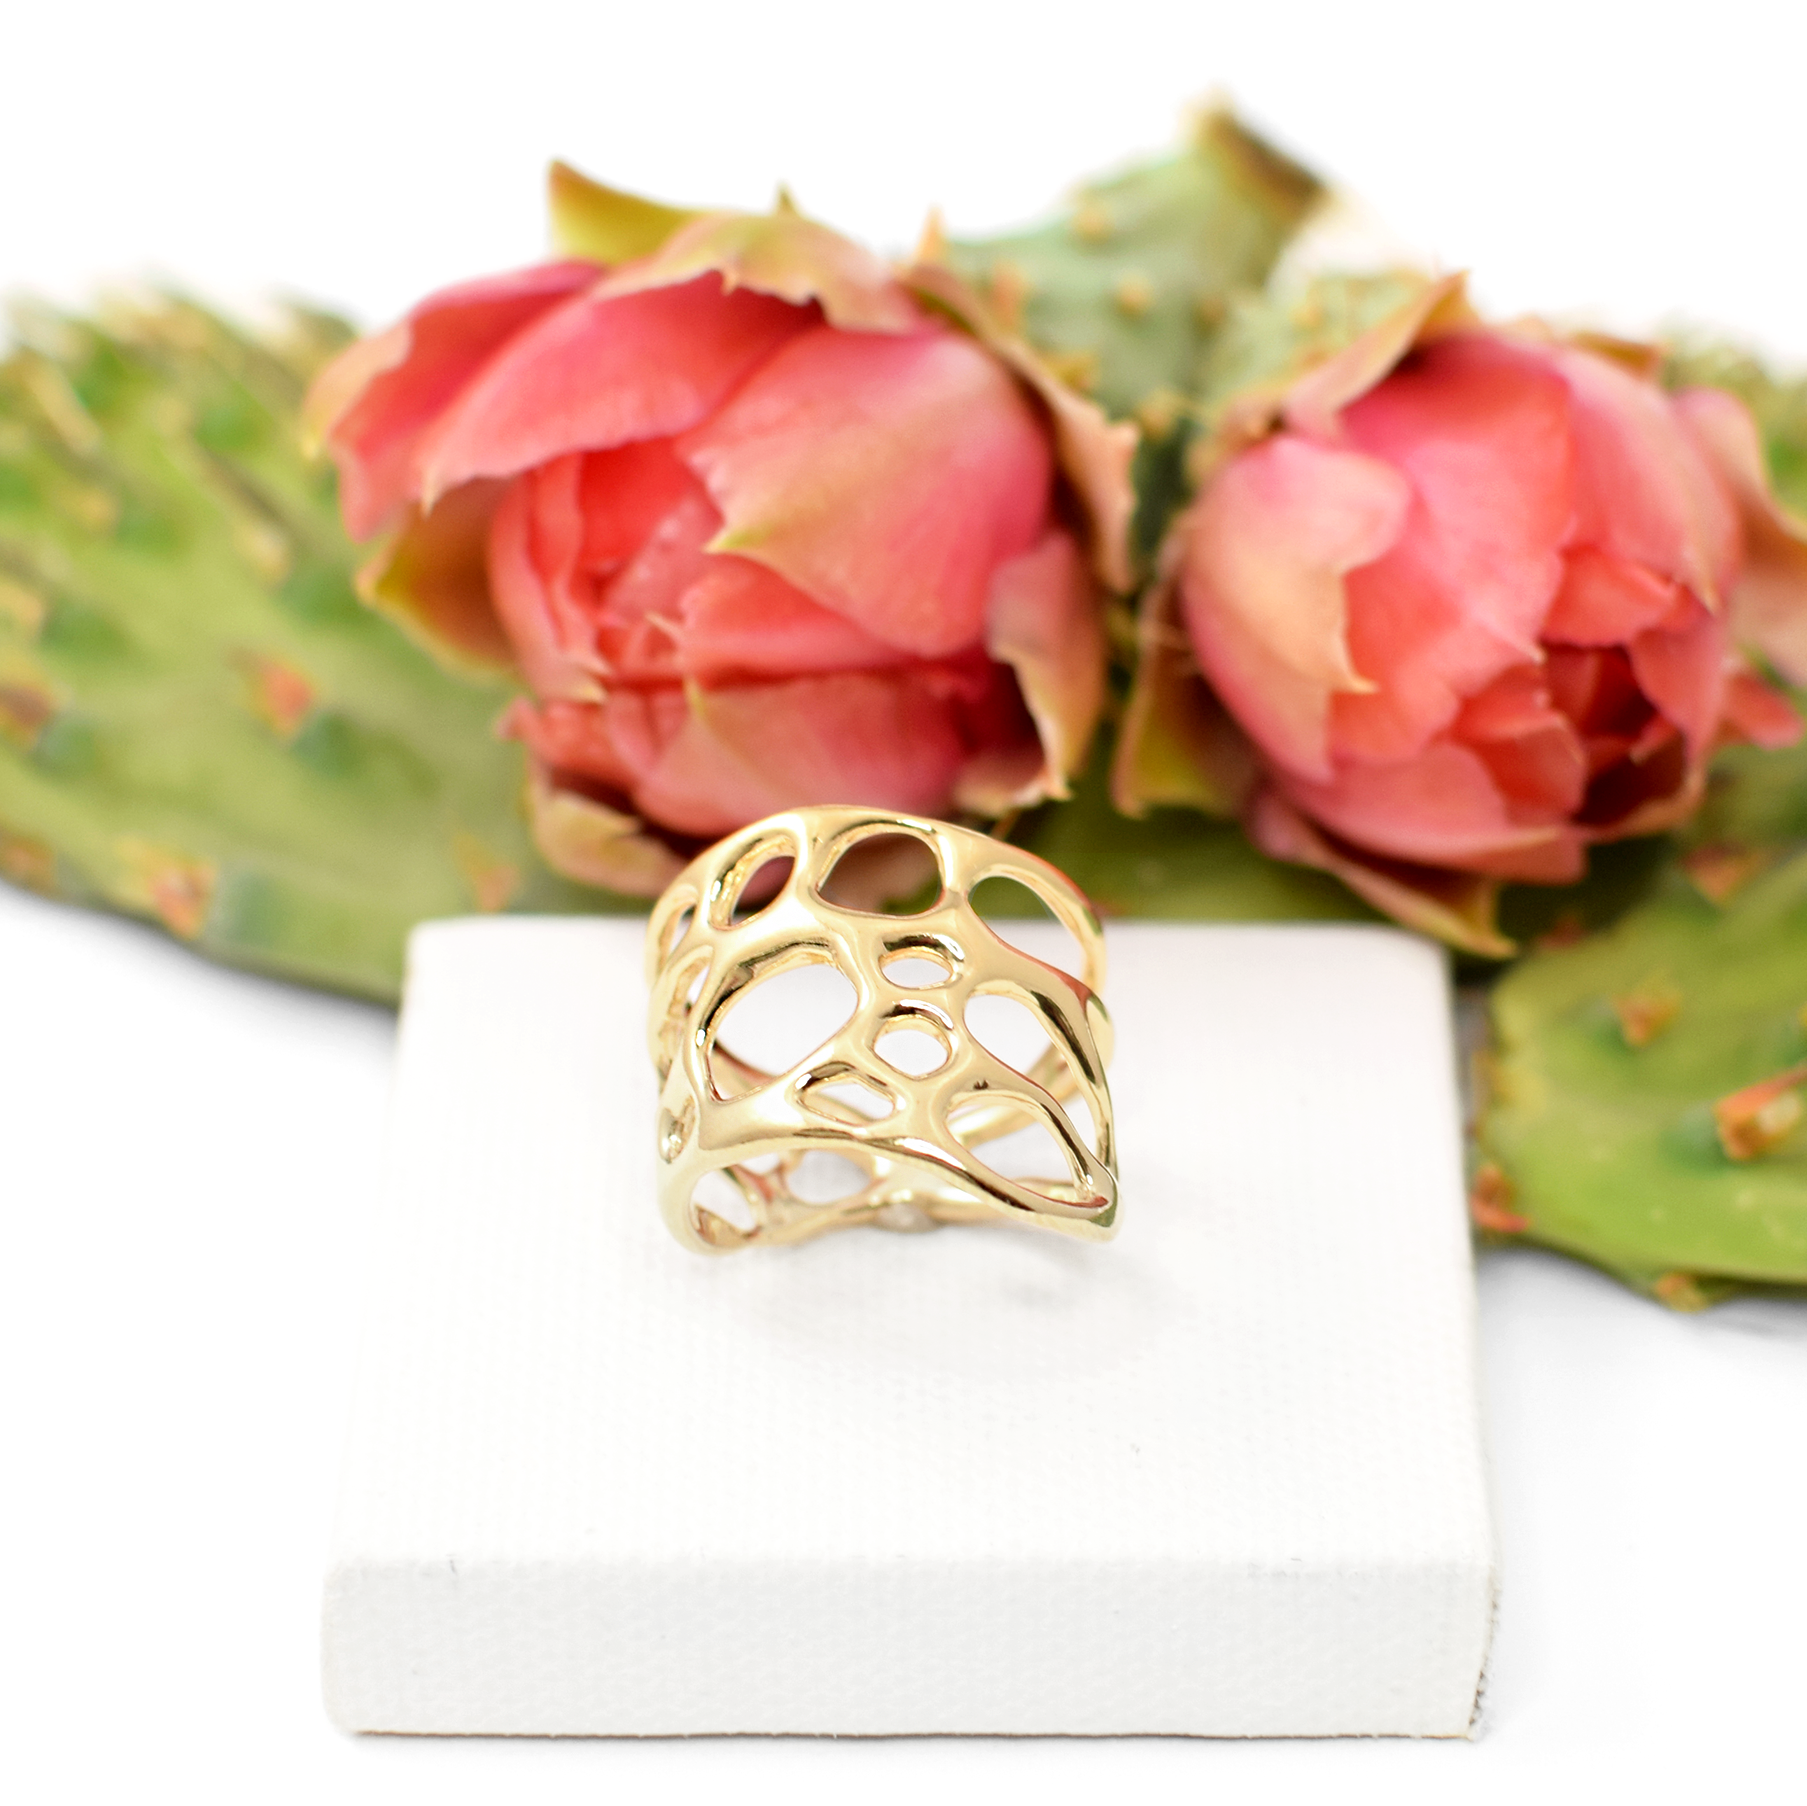 handmade botanical ring on white background with prickly pear cactus